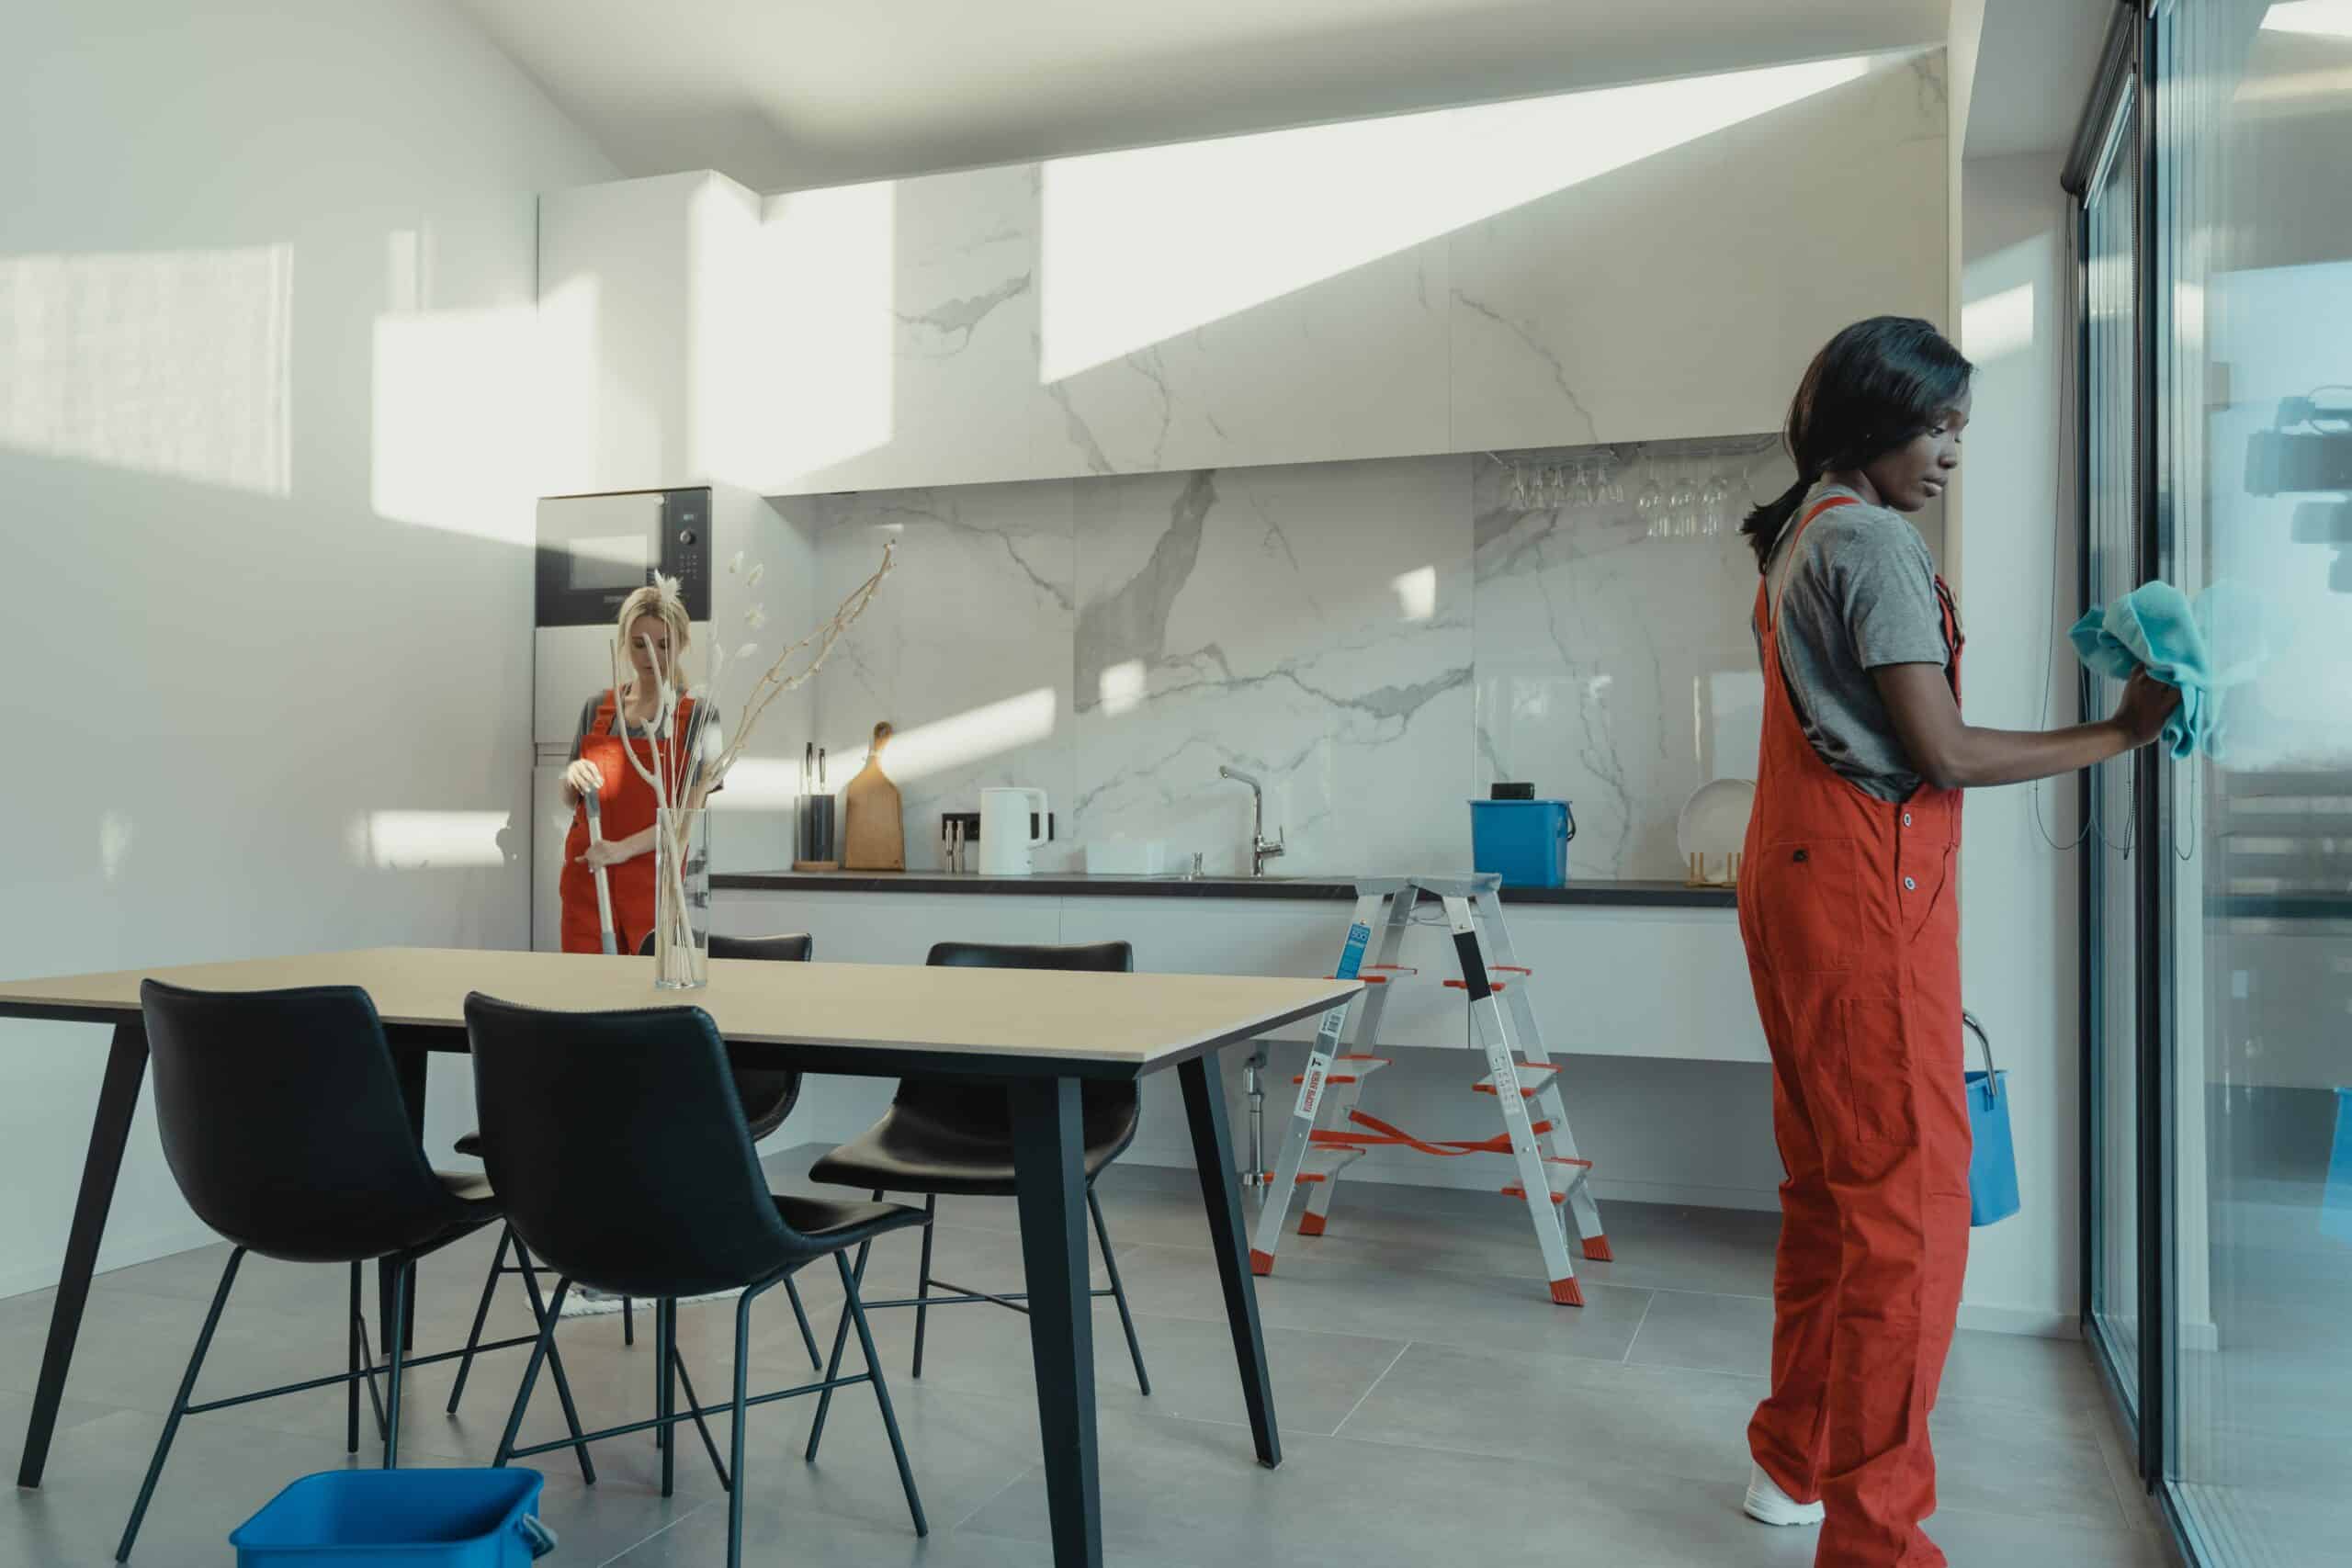 Two maids in orange outfits cleaning a kitchen.